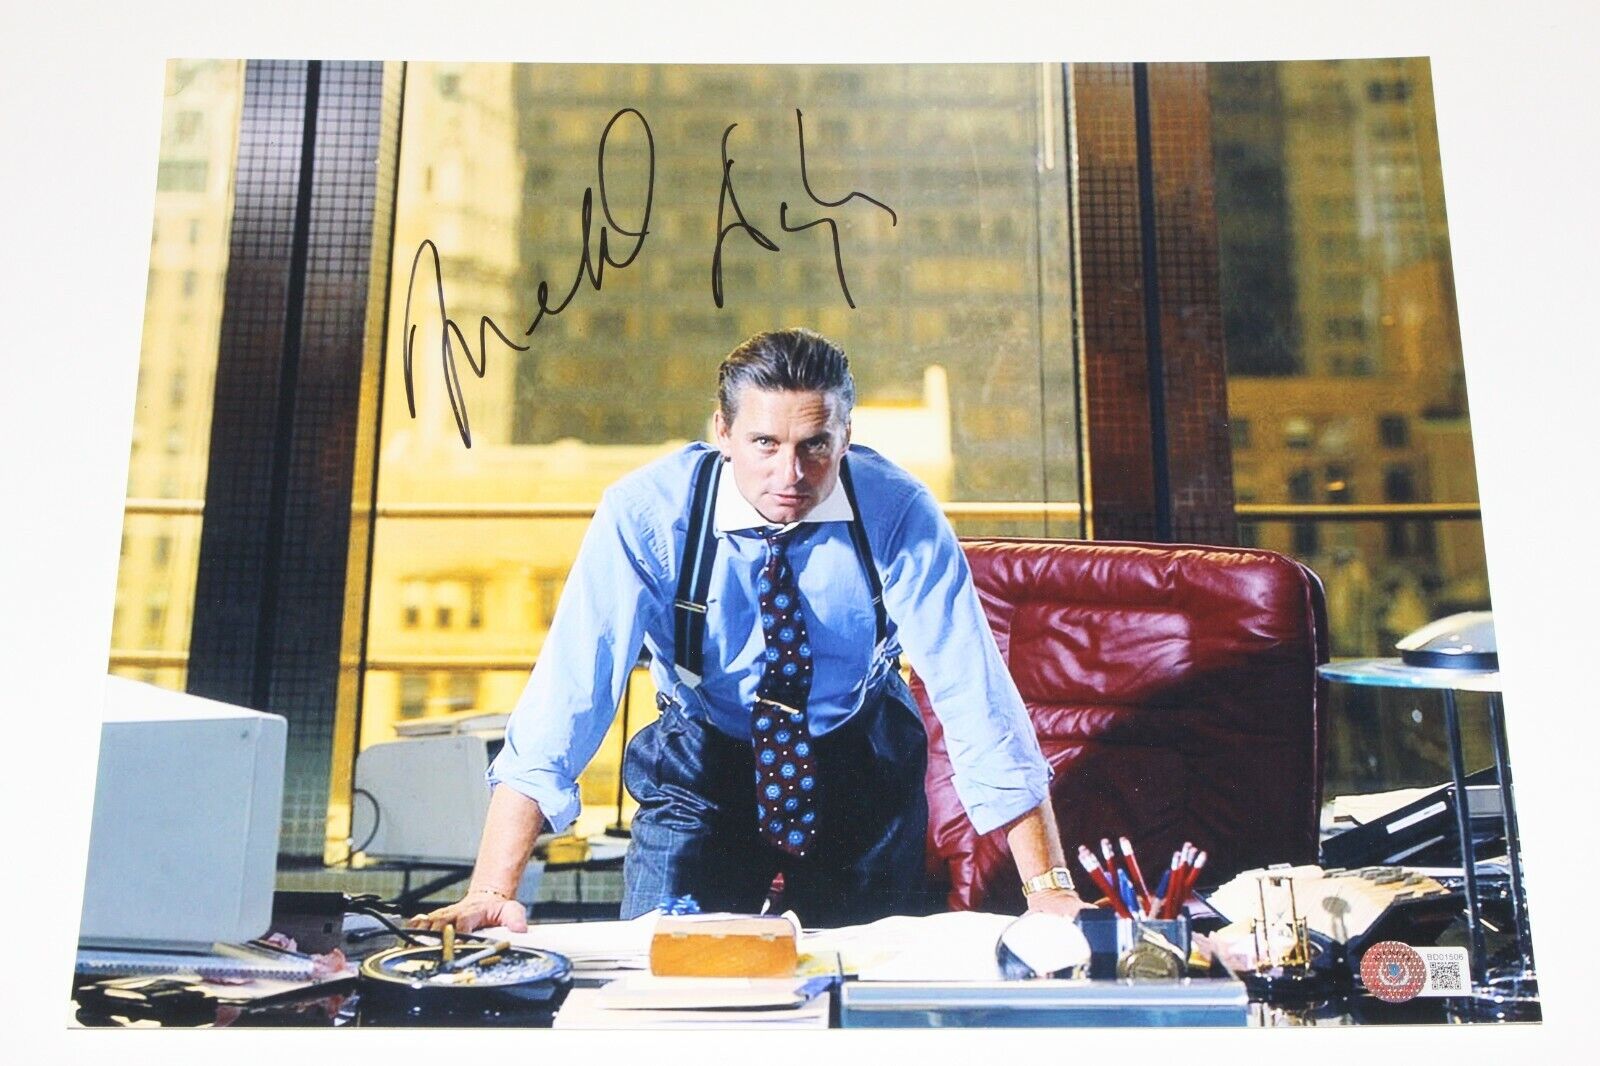 MICHAEL DOUGLAS SIGNED WALL STREET 11x14 MOVIE Photo Poster painting BECKETT COA GREED IS GOOD